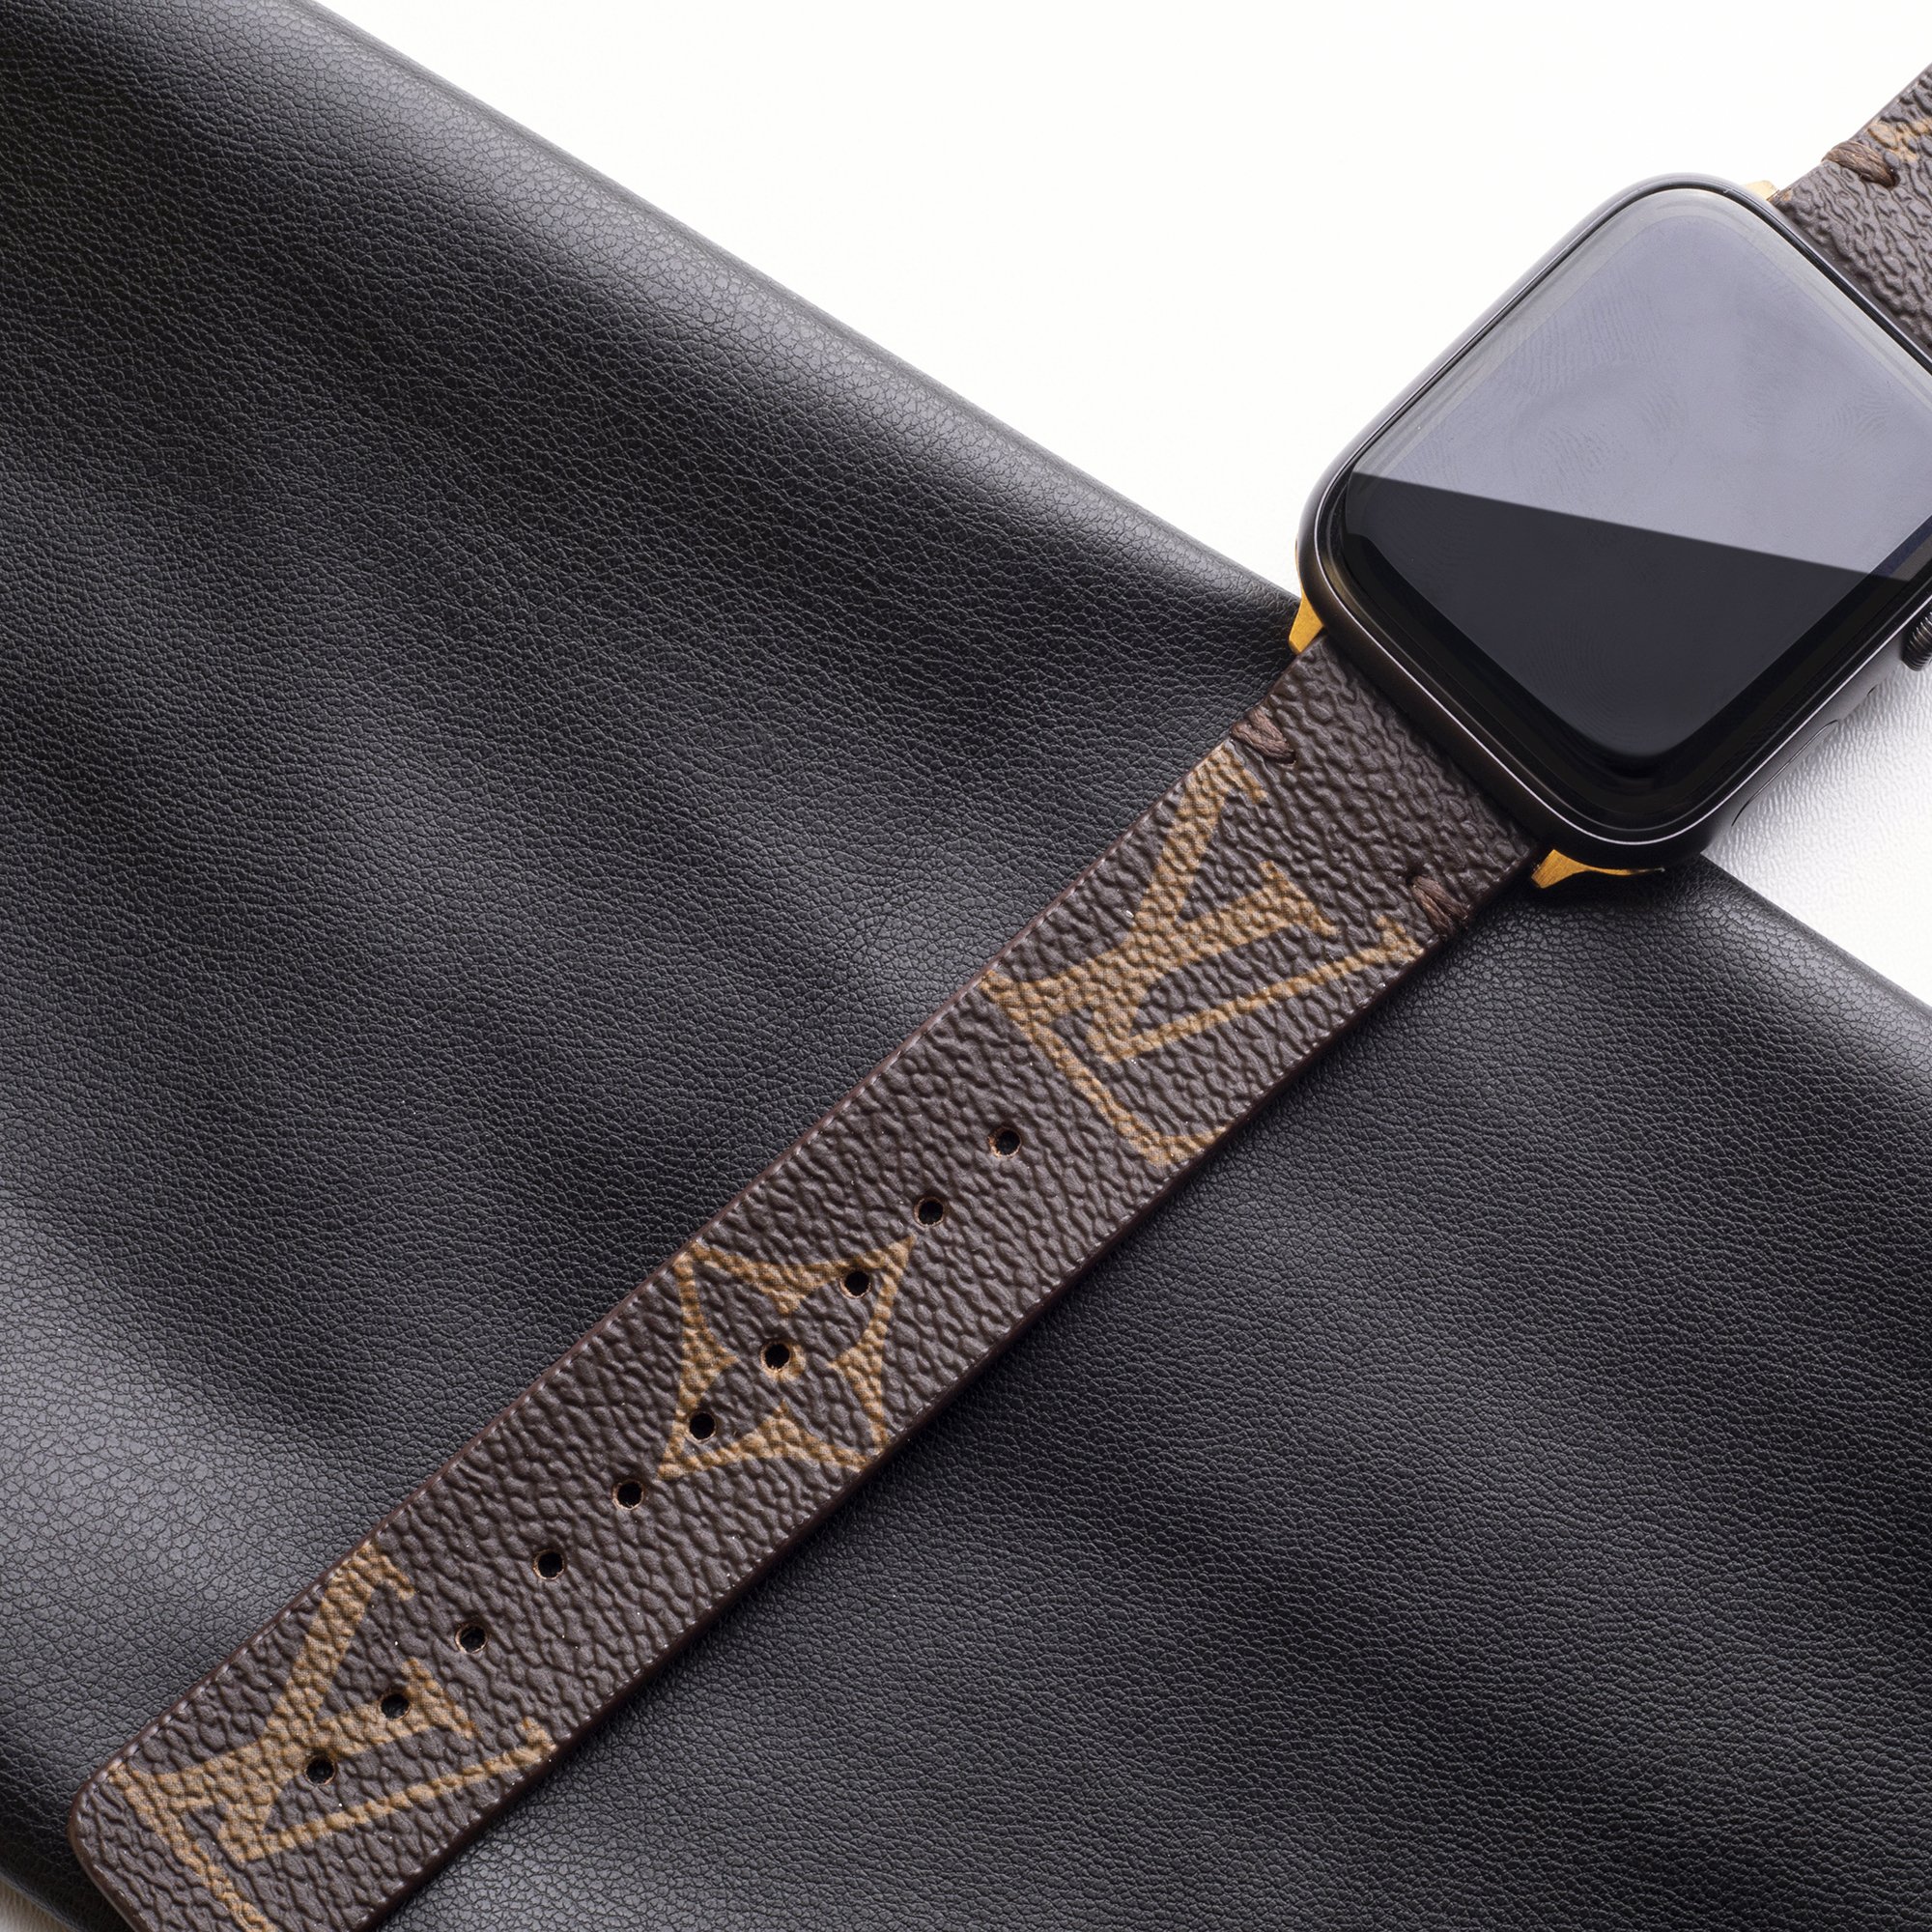 Buy Authentic Louis Vuitton Apple Watch Band Online In India -  India